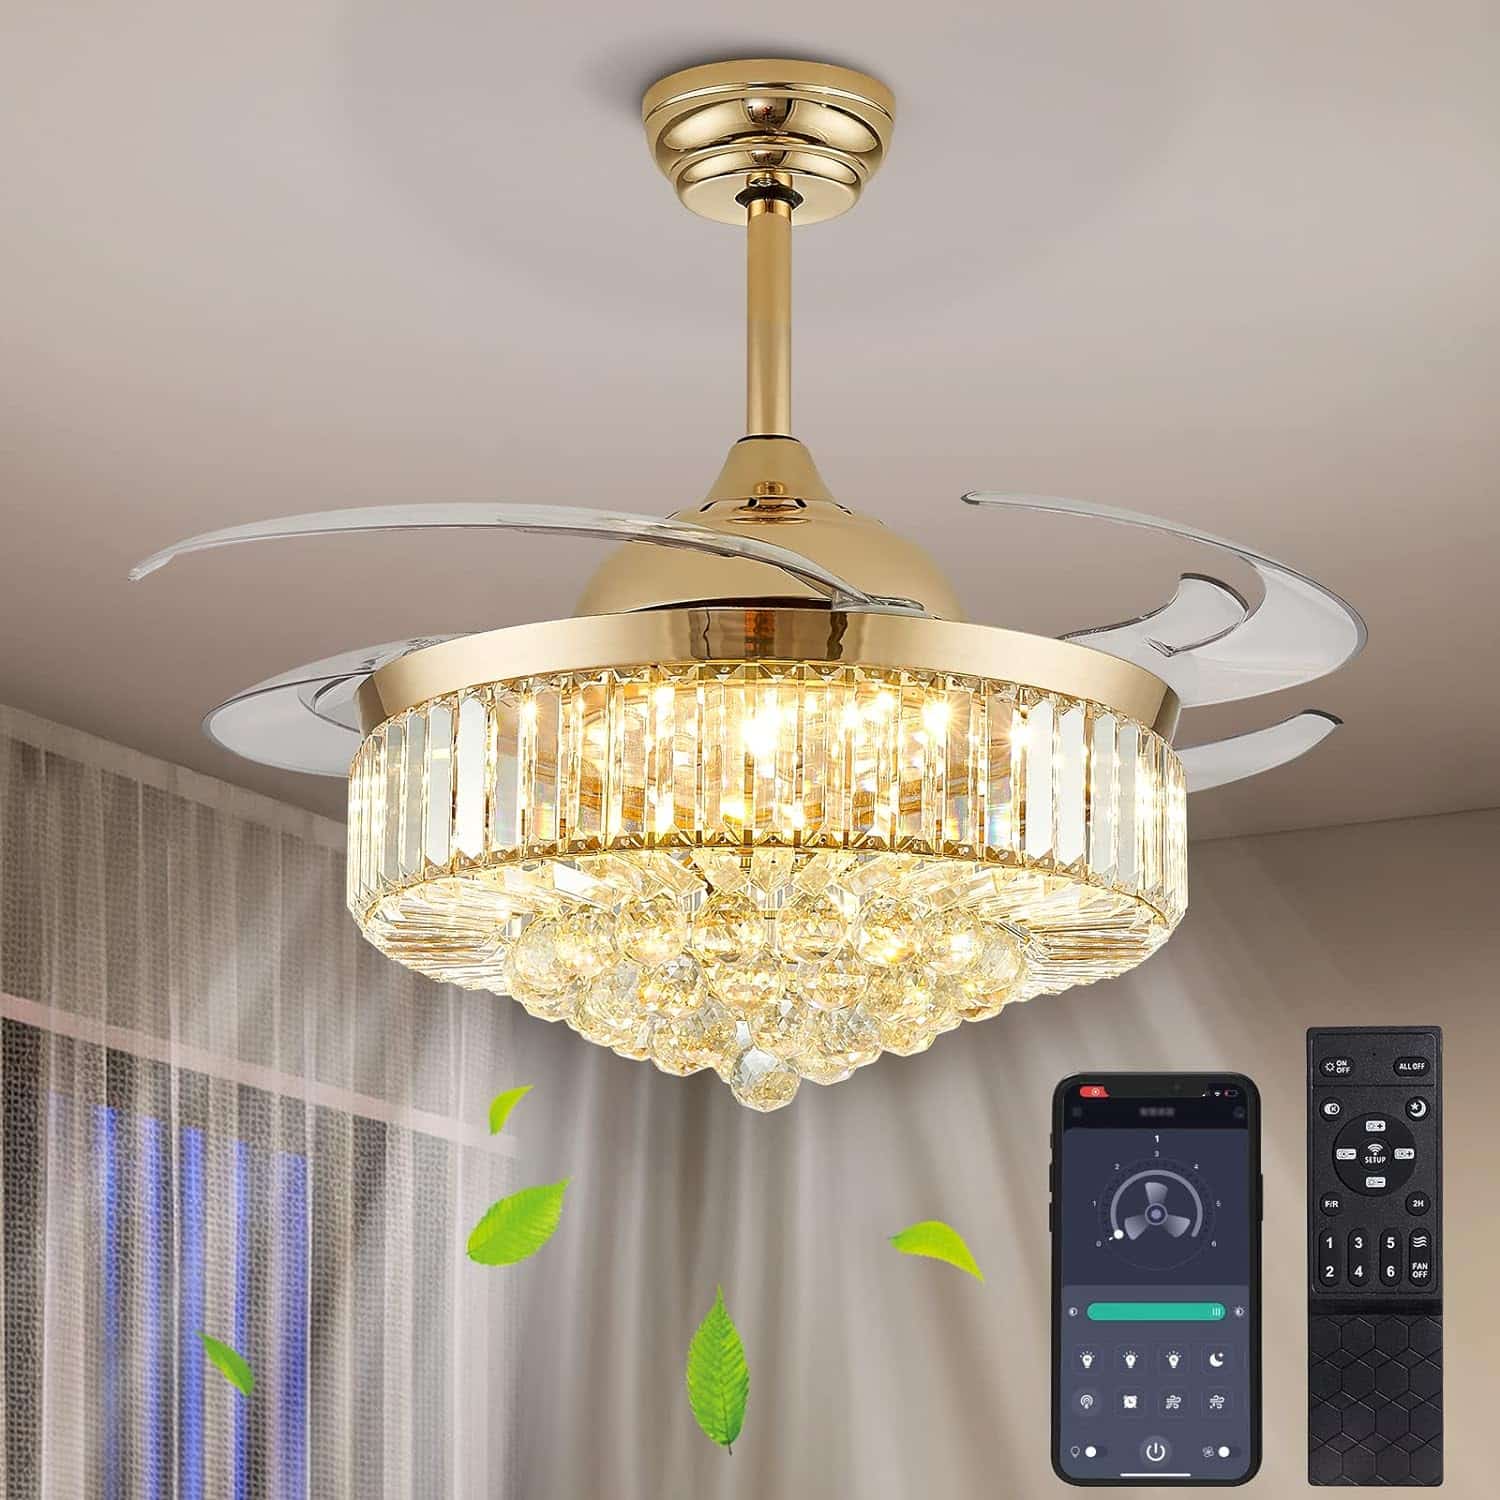 CROSSIO 48 Modern Gold Crystal Ceiling Fan with Light and Remote Crystal Fandelier LED Dimmable Chandelier Fan with Invisible Reversible Fan Blades for Kitchen, Dining Room, Living Room,Bedroom